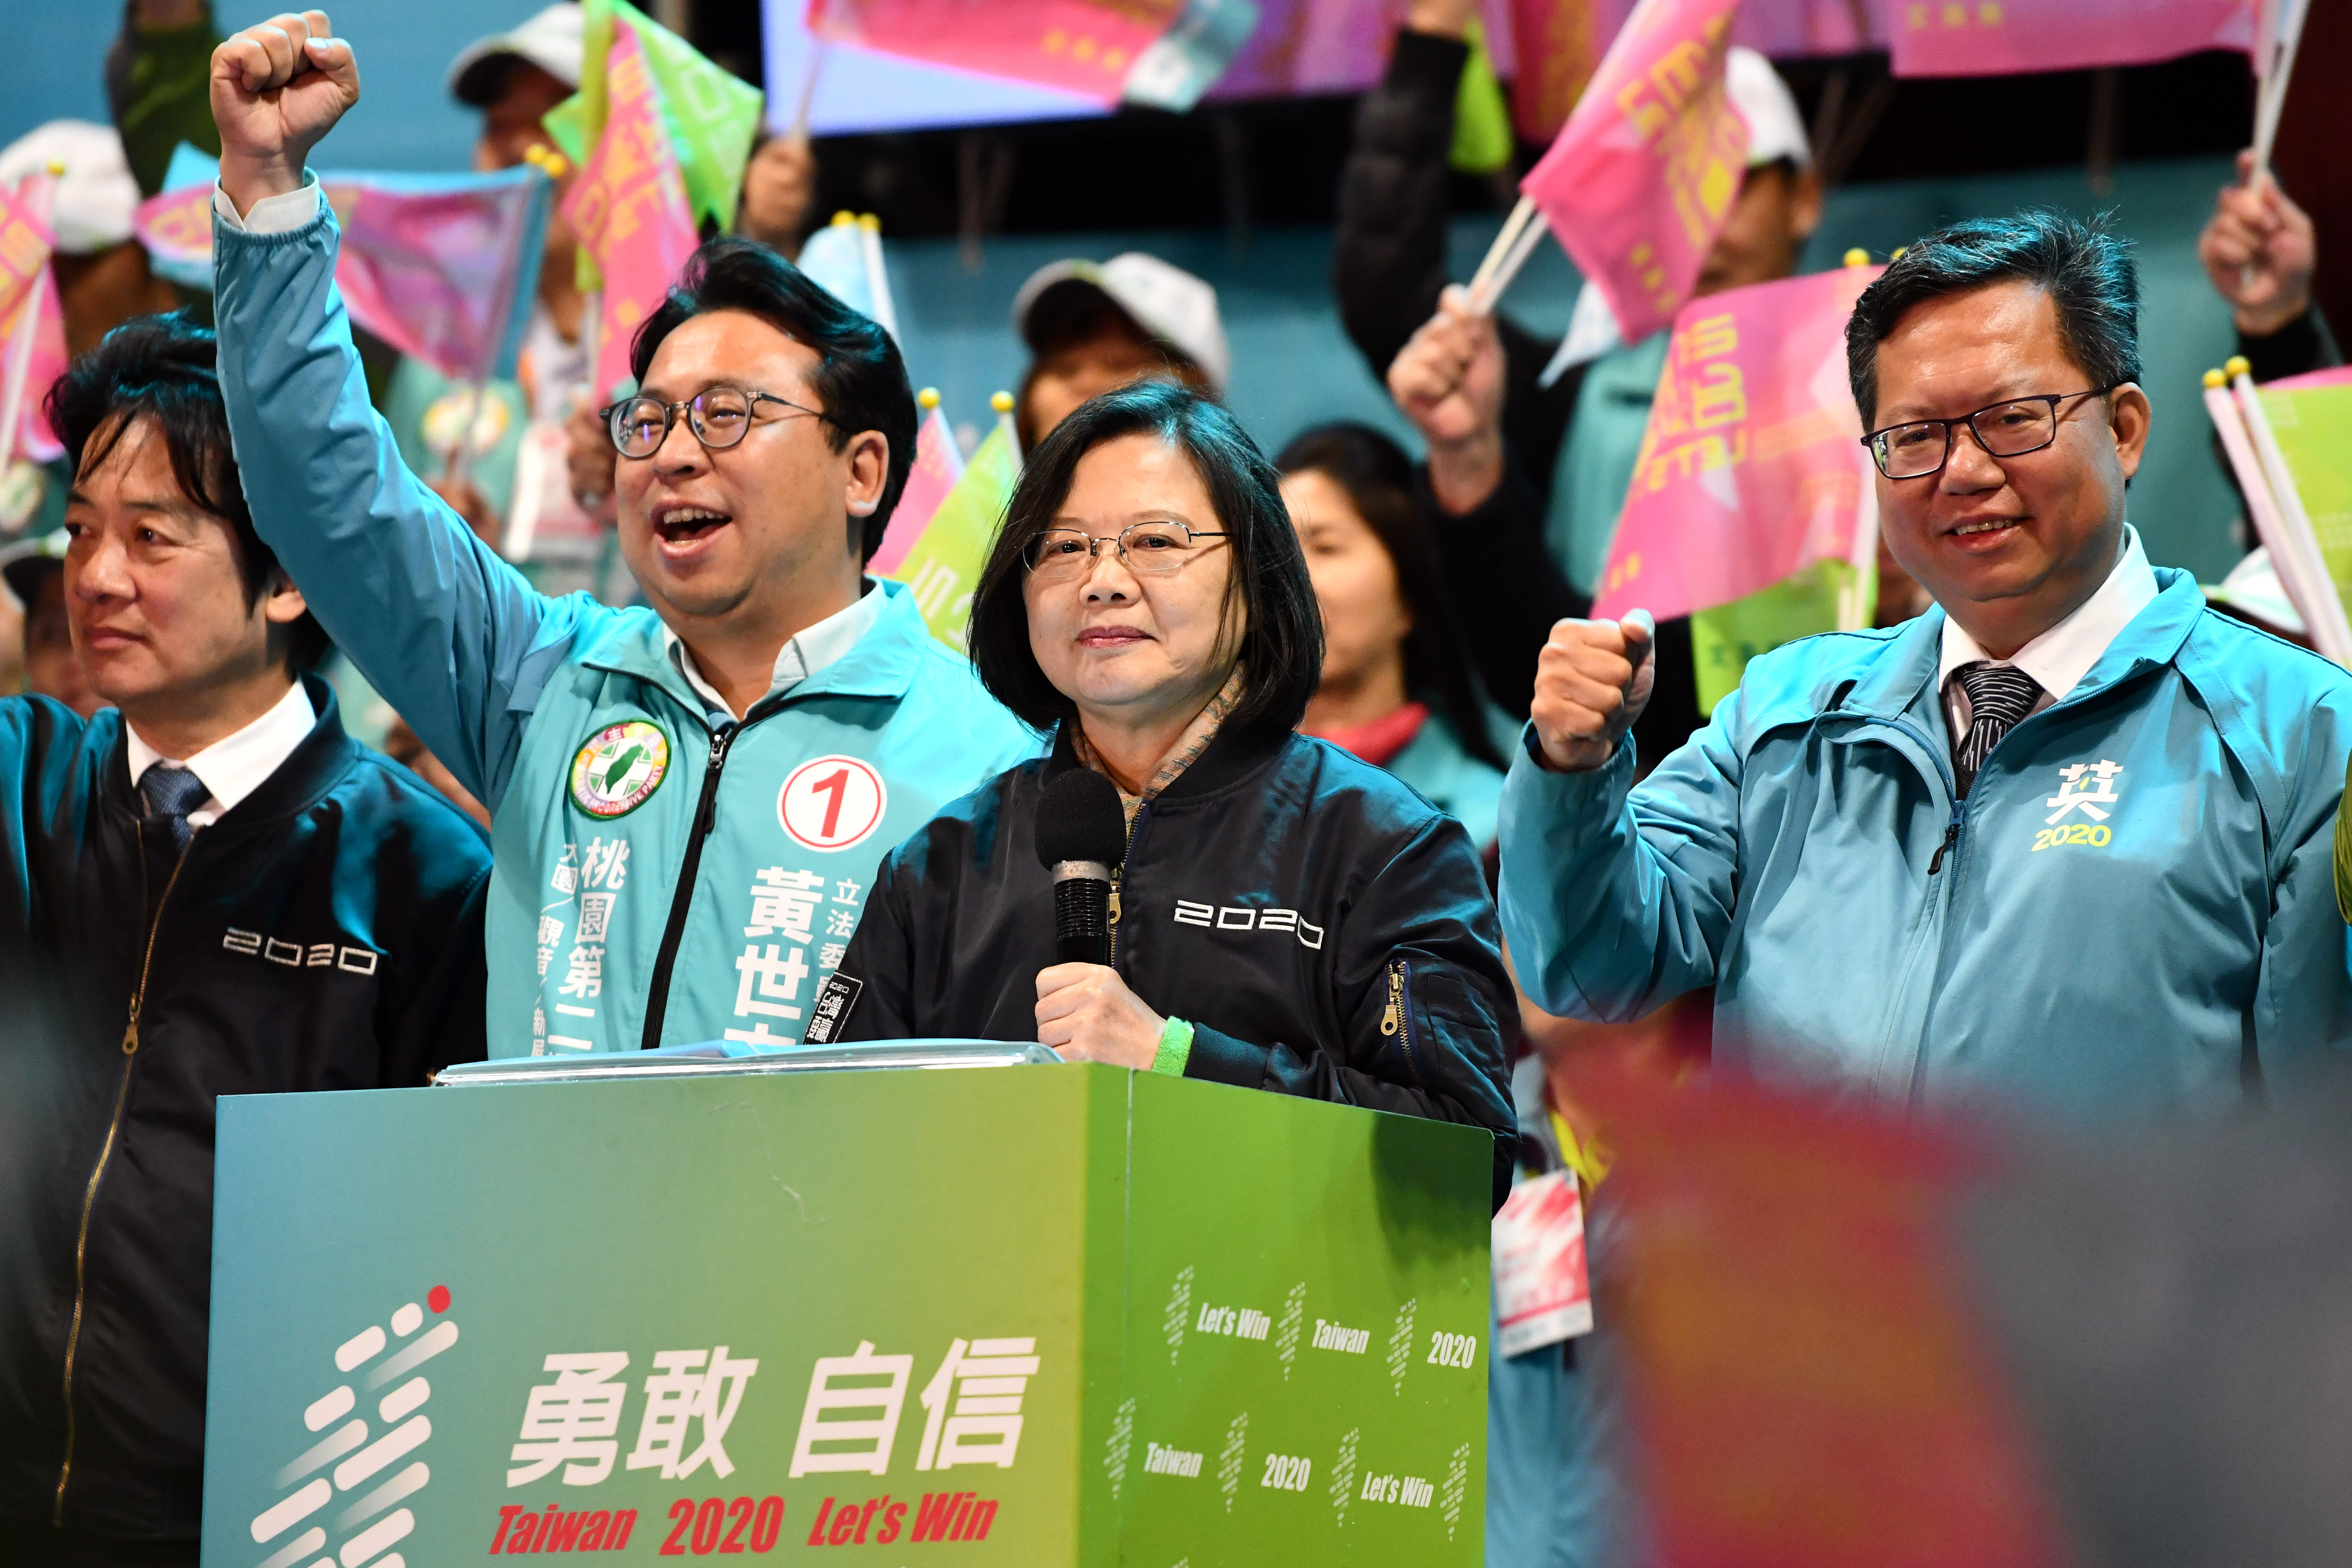 TAOYUAN, TAIWAN - JANUARY 08: Taiwan&#039;s current president and Democratic Progressive Party presidential candidate, Tsai Ing-wen, speaks during a rally ahead of Saturdays presidential election 